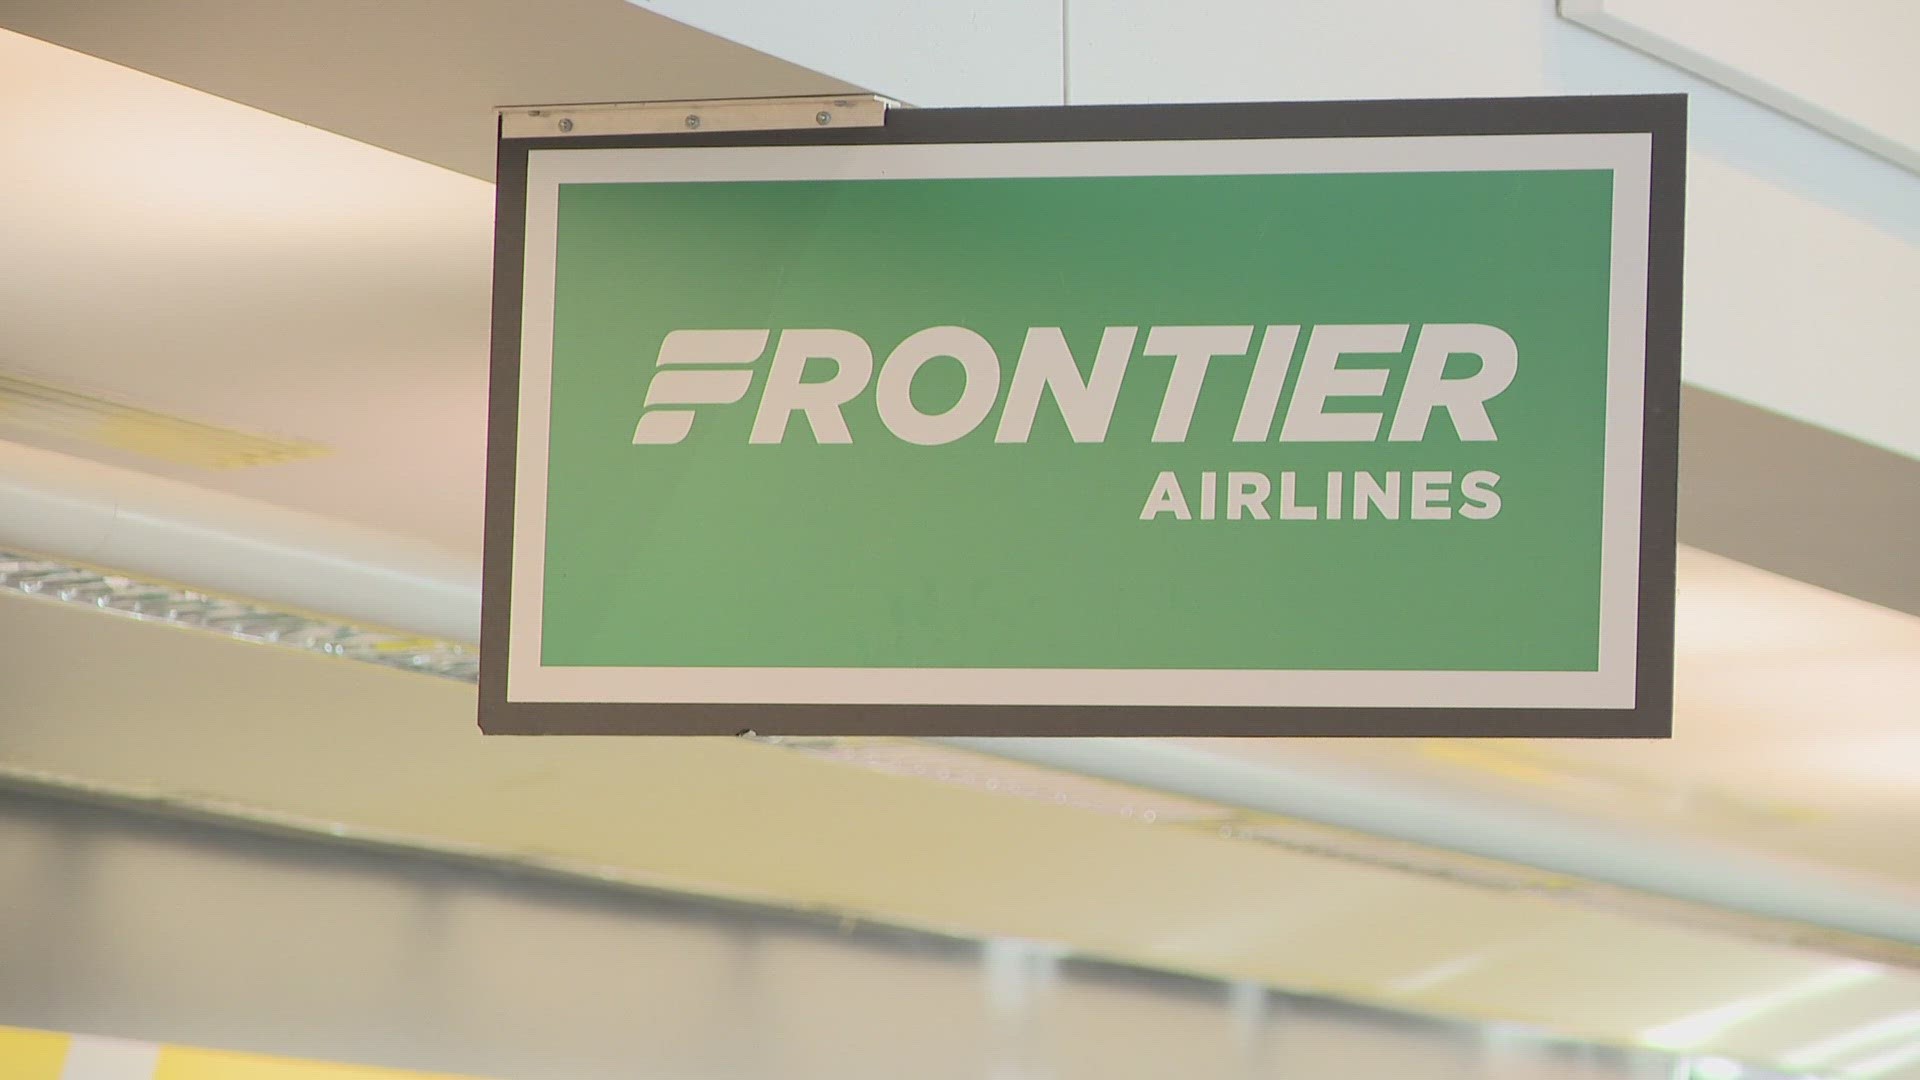 Frontier will fly daily from CLE to New York starting in April, plus four times a week to MSP beginning in May.